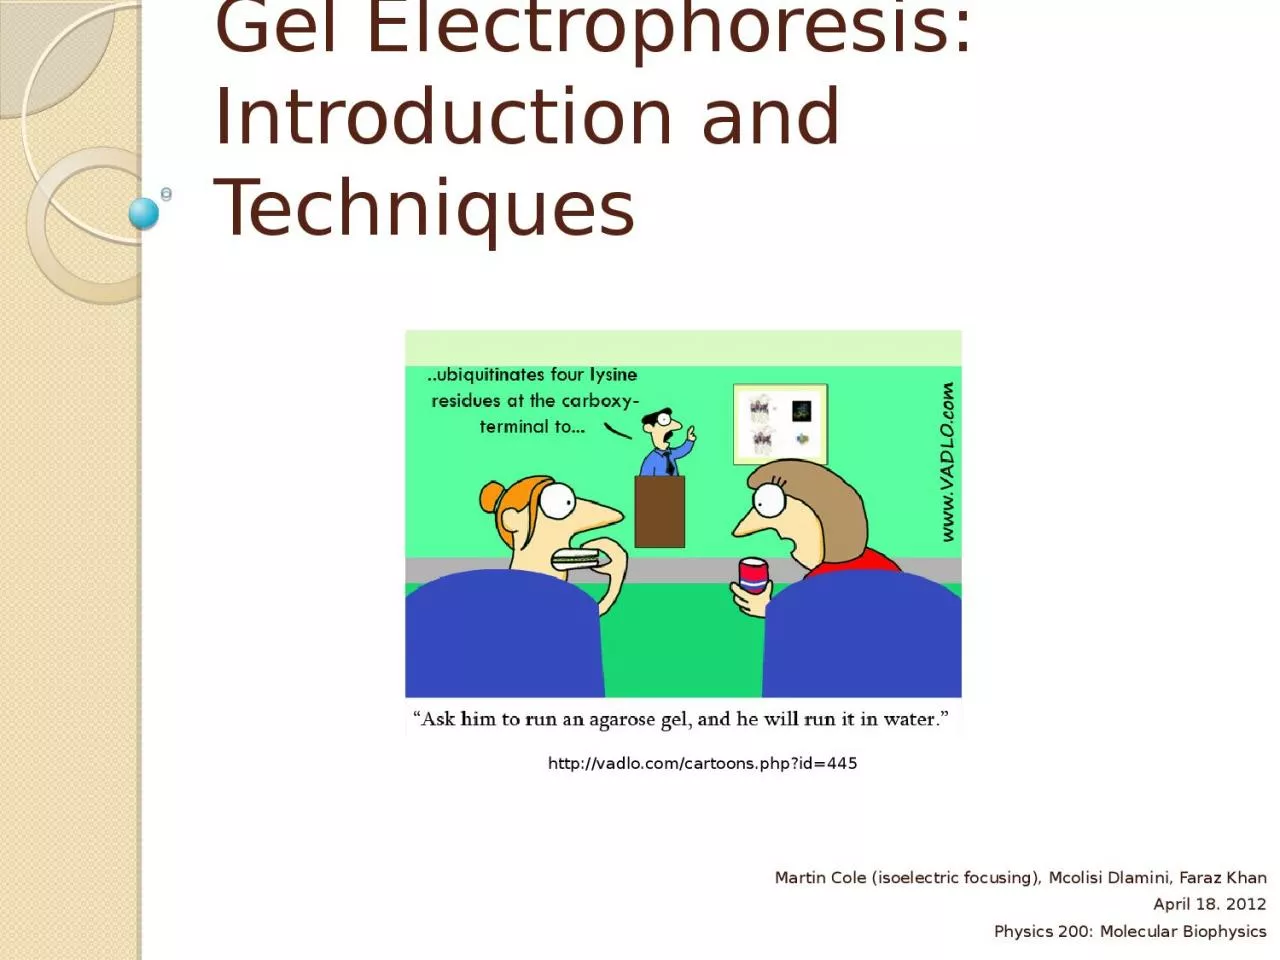 Gel Electrophoresis: Introduction and Techniques